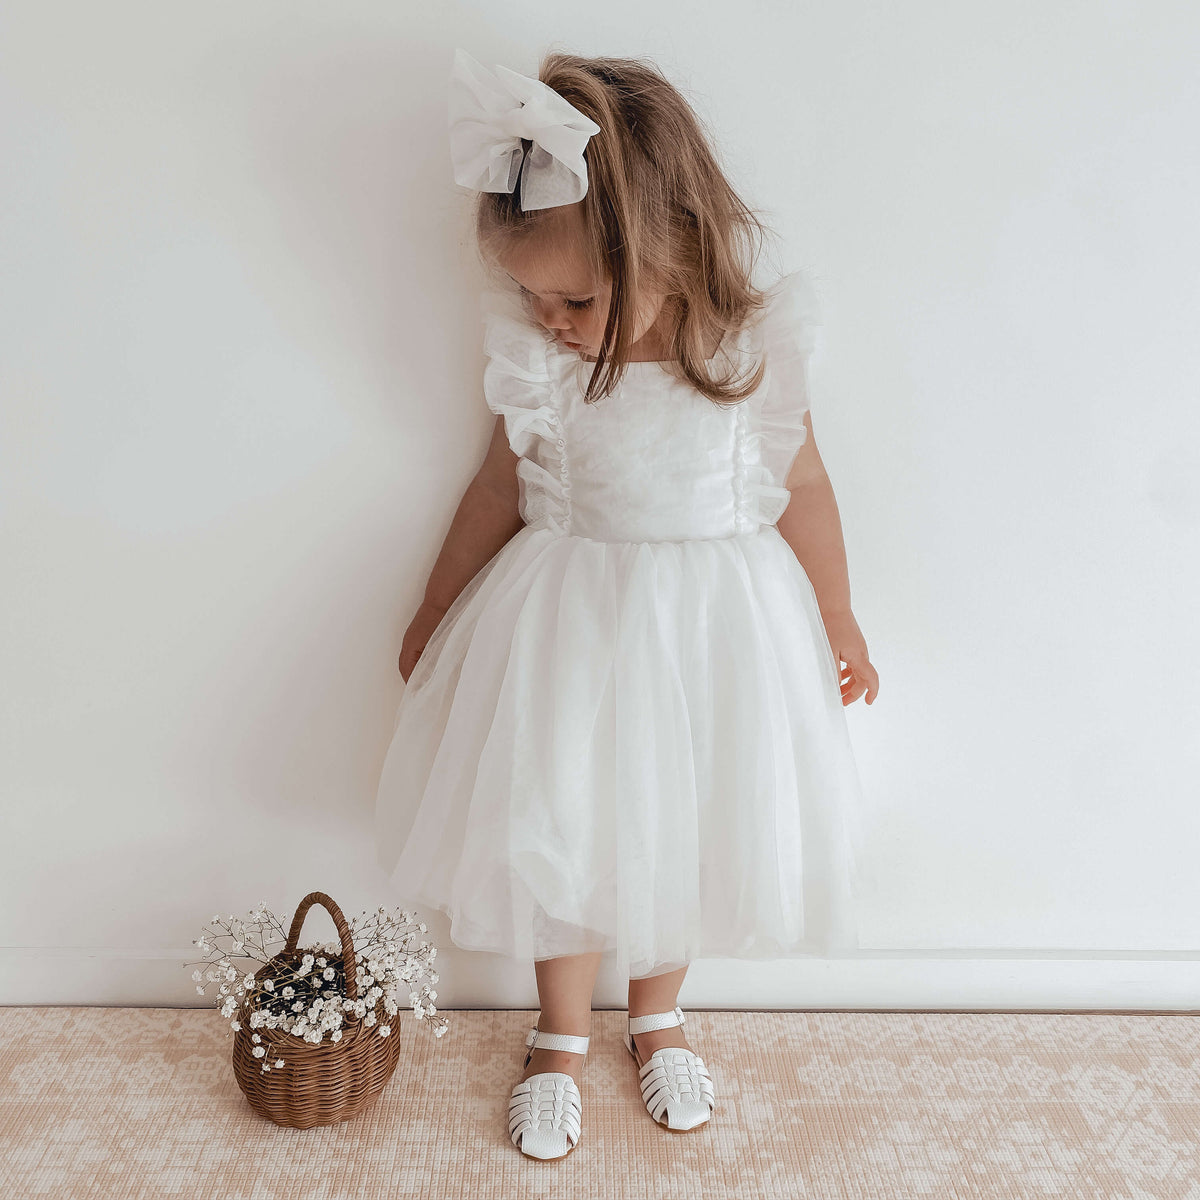 Gigi white flower girl dress worn by a young girl, she also wears our ivory tulle bow in her hair and stands beside a basket of flowers.